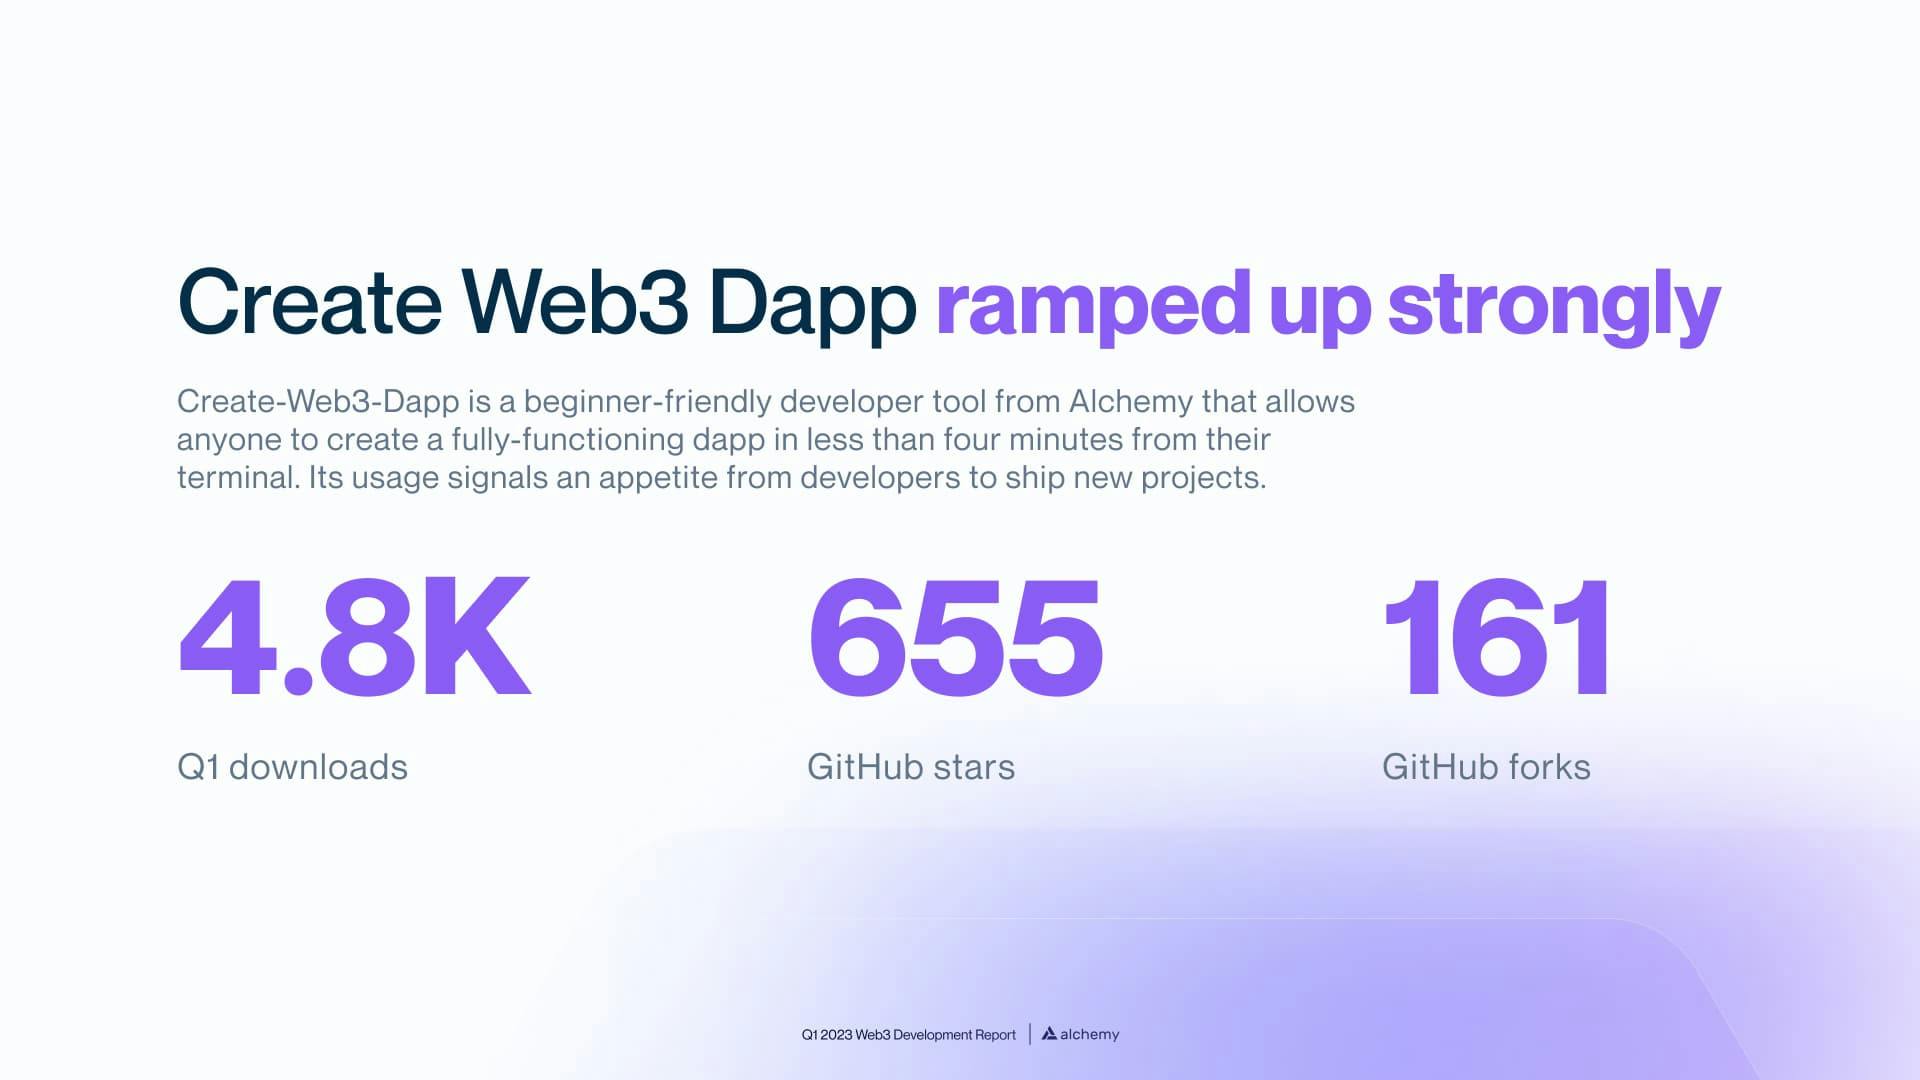 Statistics for the open-source create-web3-dapp package